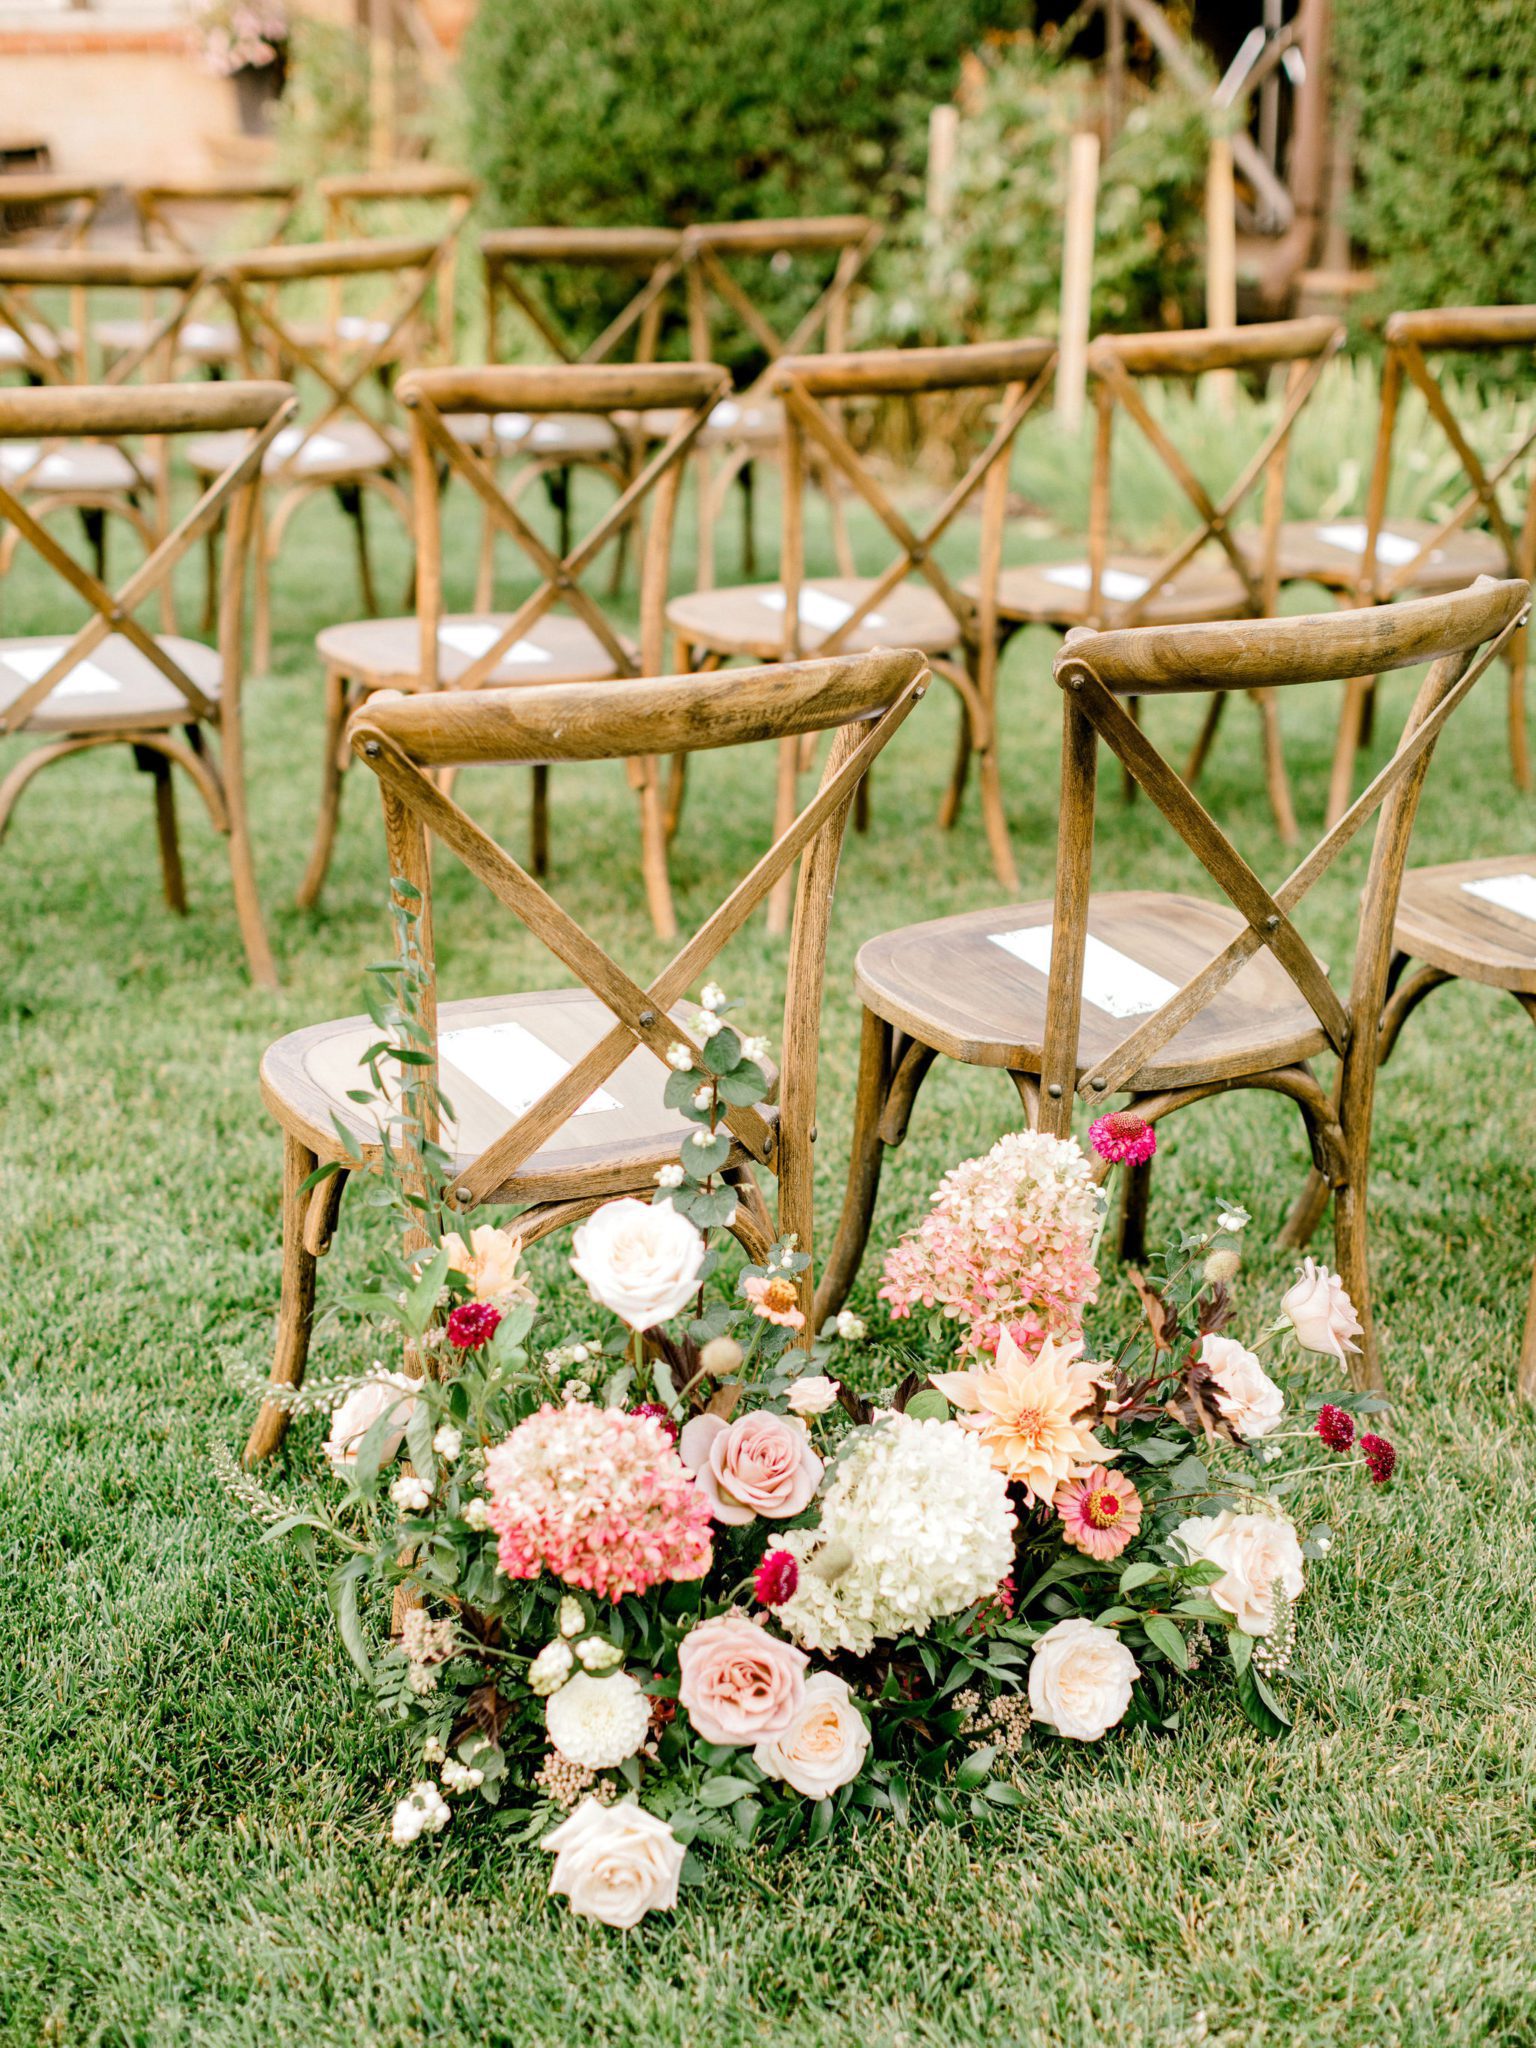 Outdoor summer wedding ceremony inspiration with farm style chairs and lavish floral details at Bow Valley Ranche near Calgary Alberta